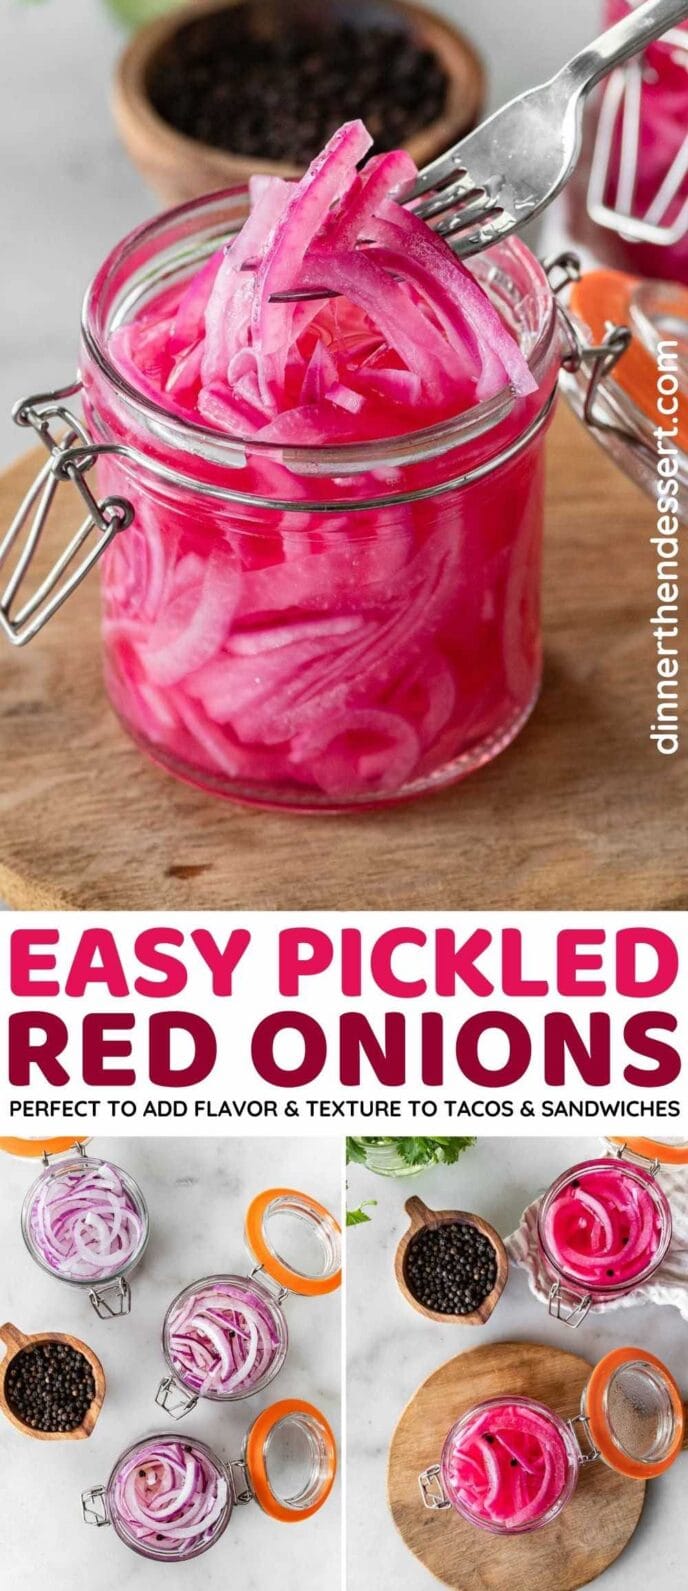 Pickled Red Onions collage